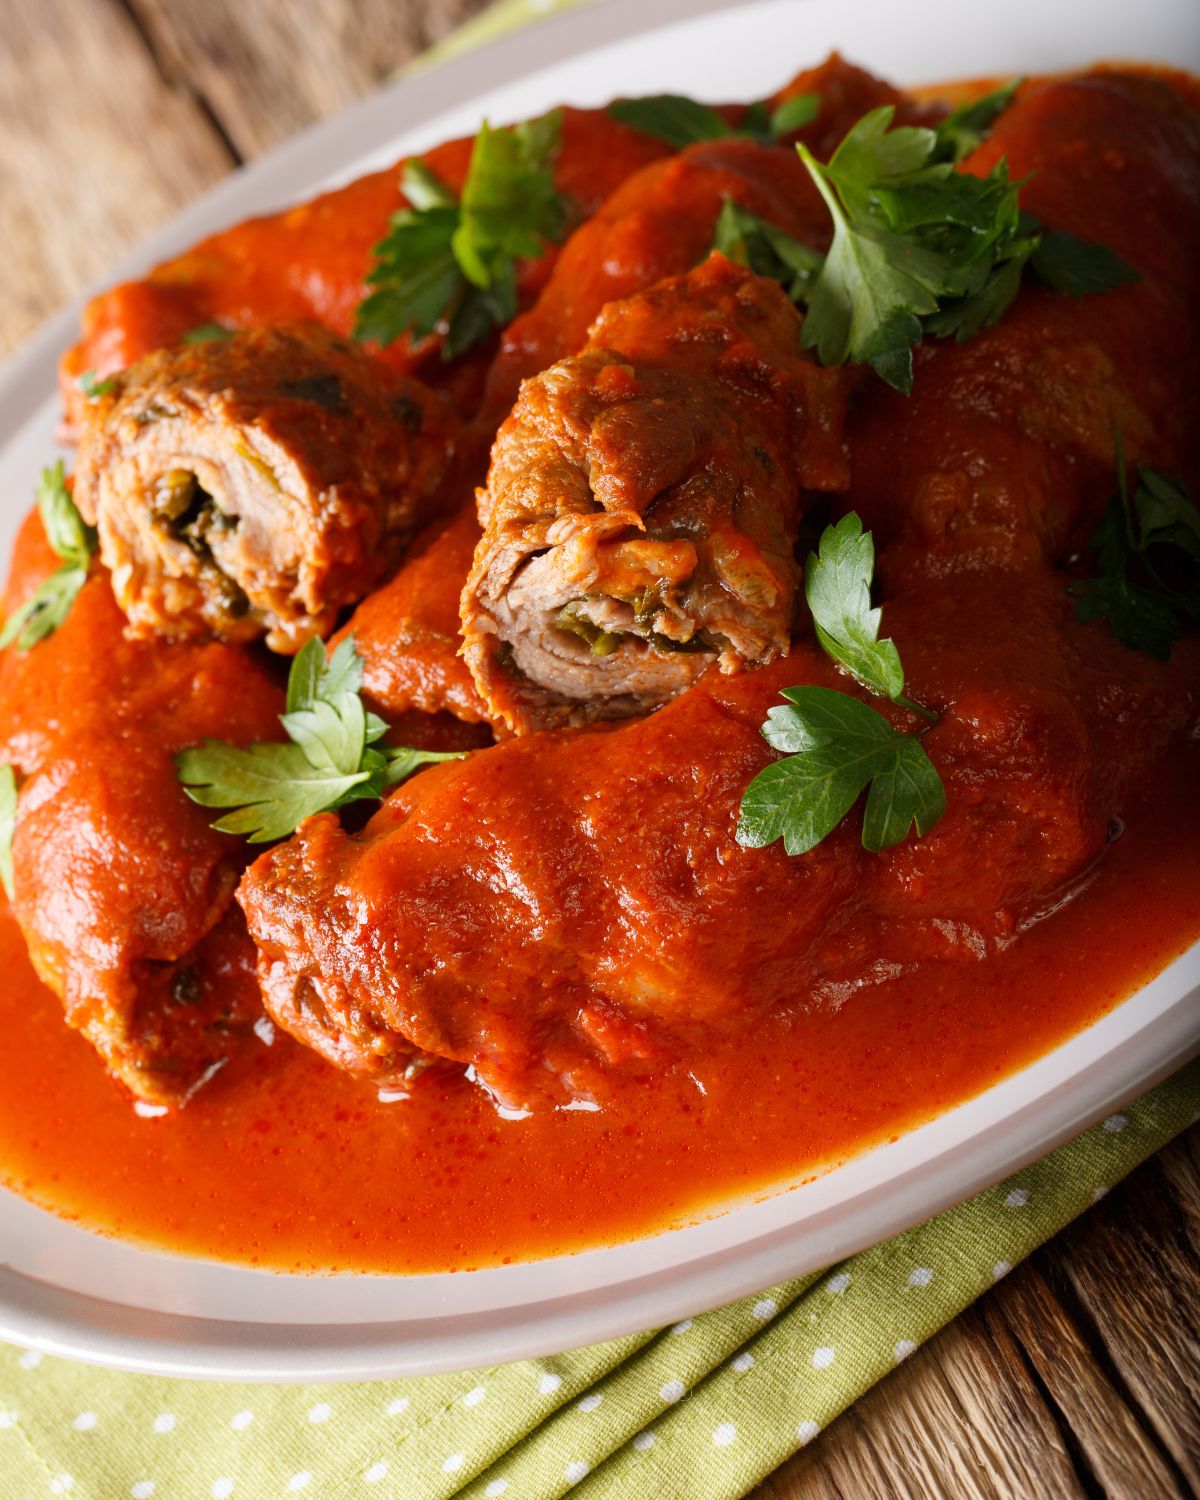 An Italian plate of Braciole, a delicious dish consisting of meat and sauce.